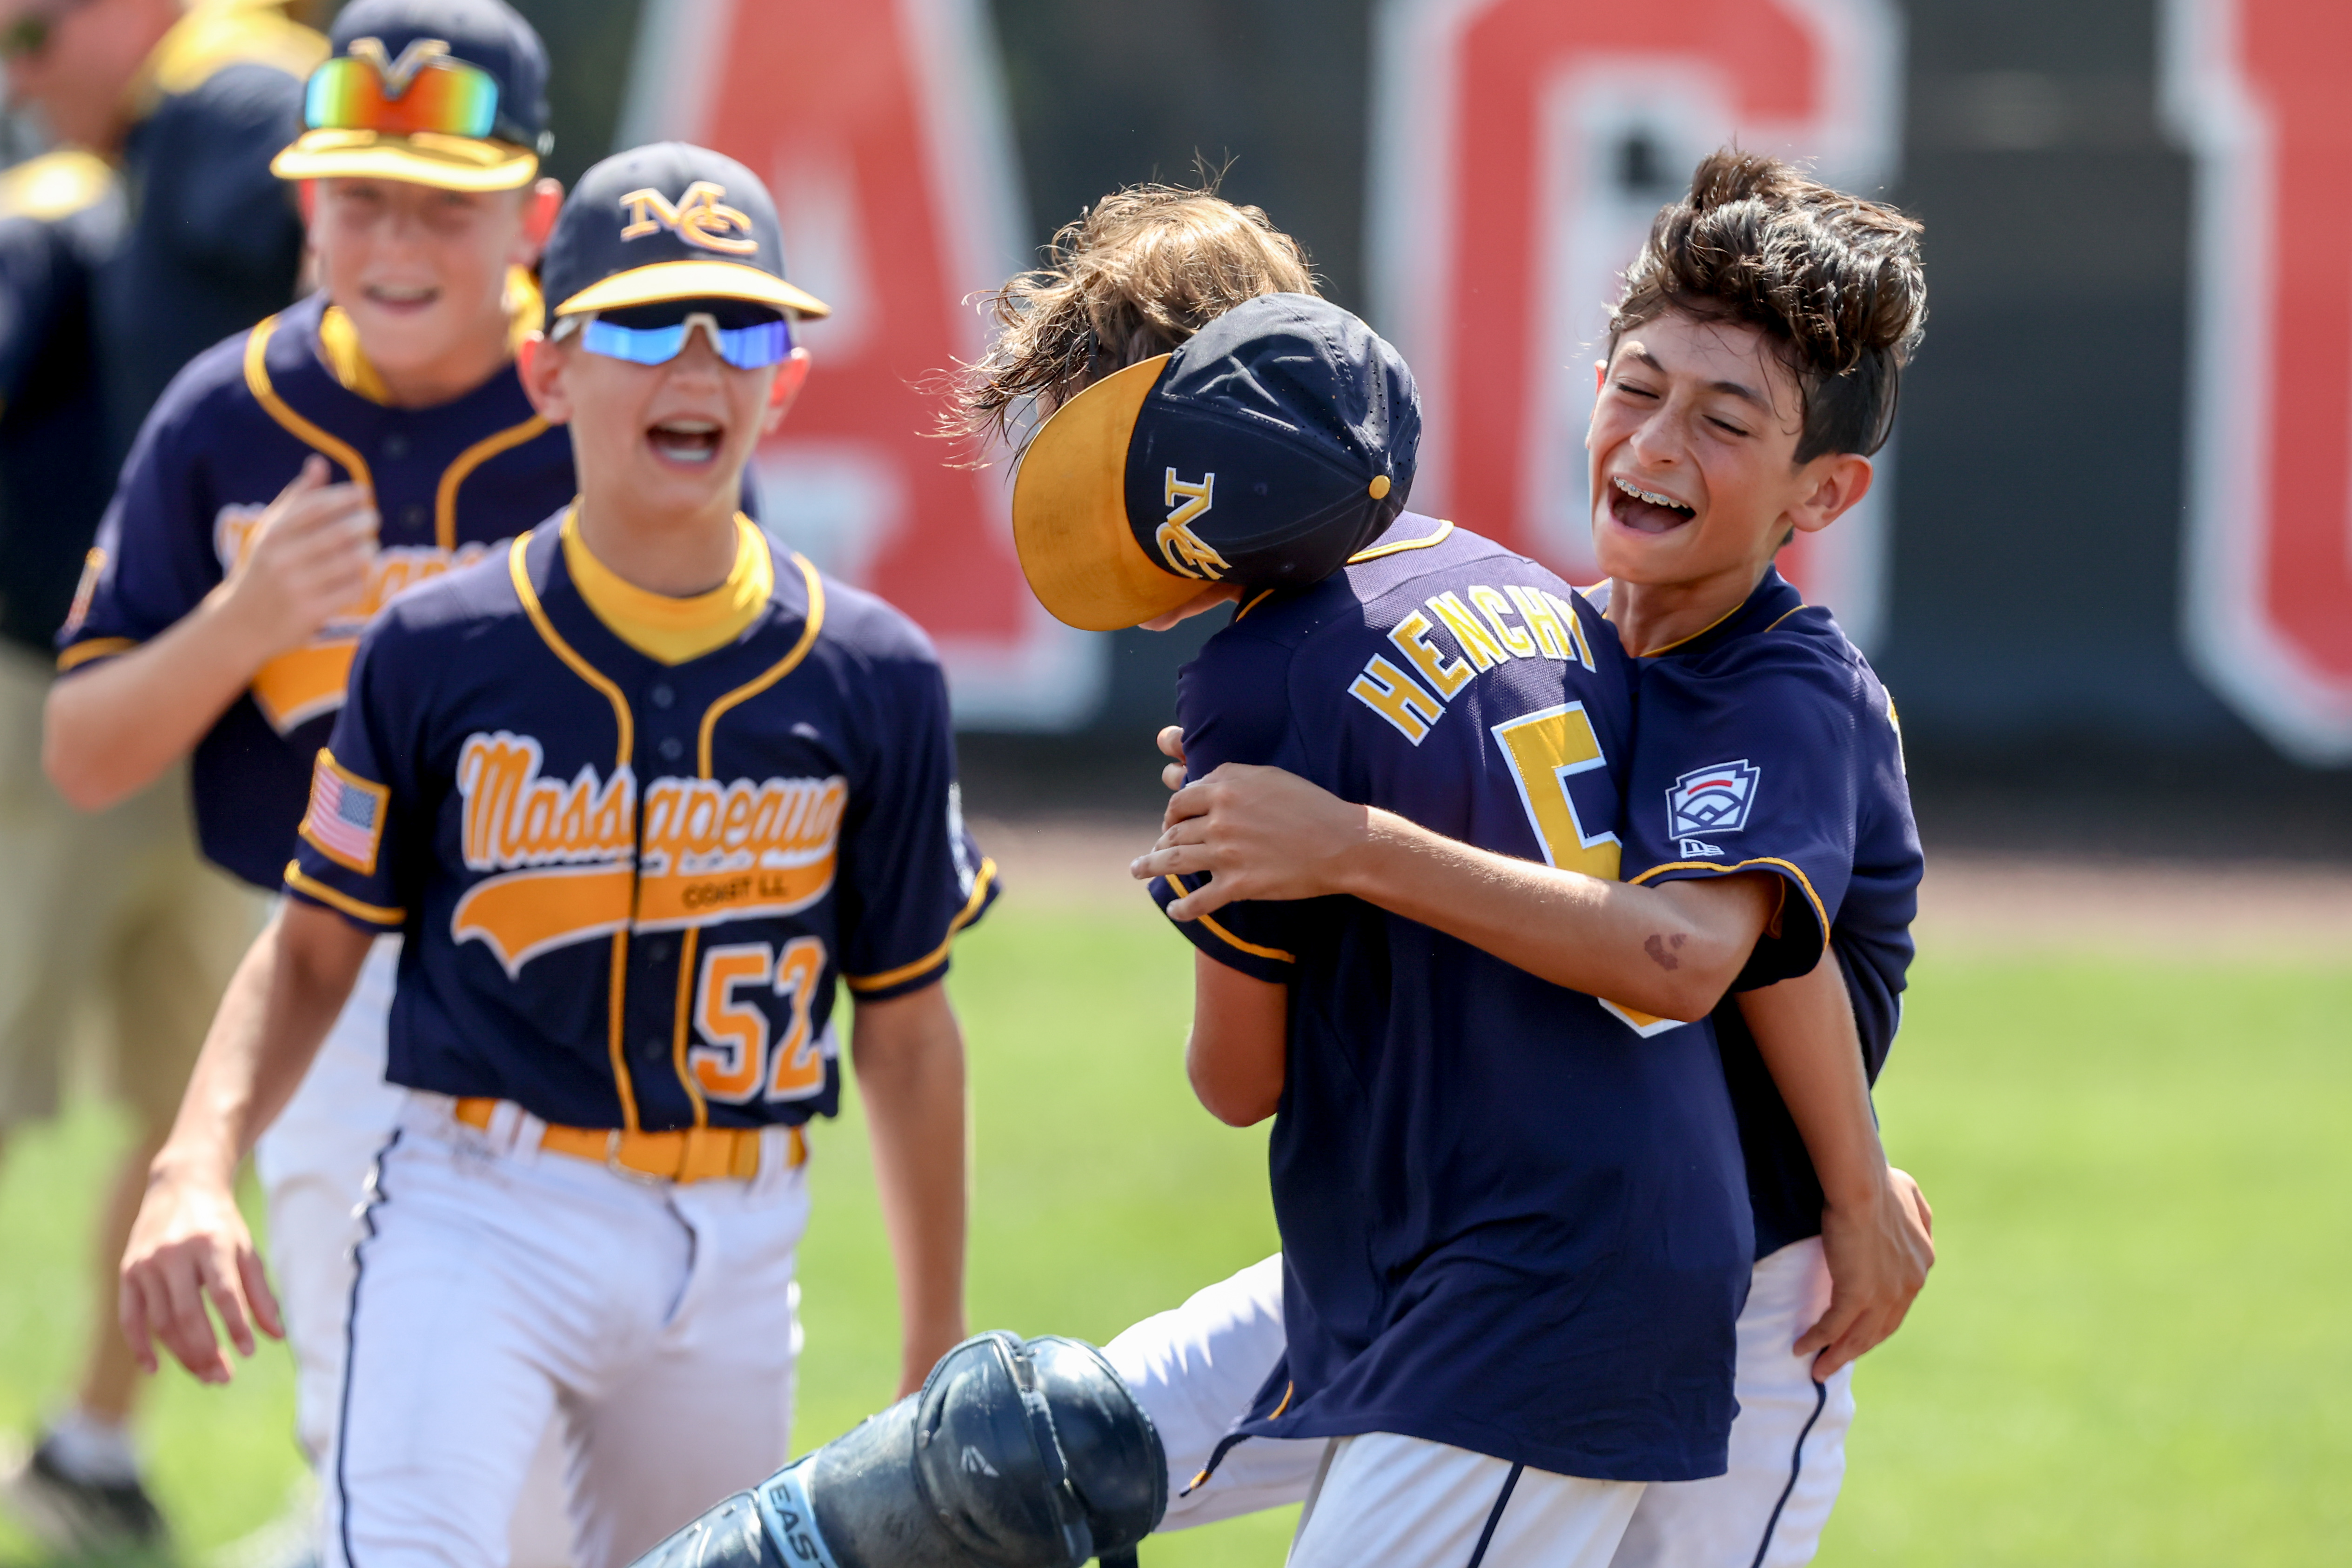 Toms River East Little League Wins 2nd Straight State Title